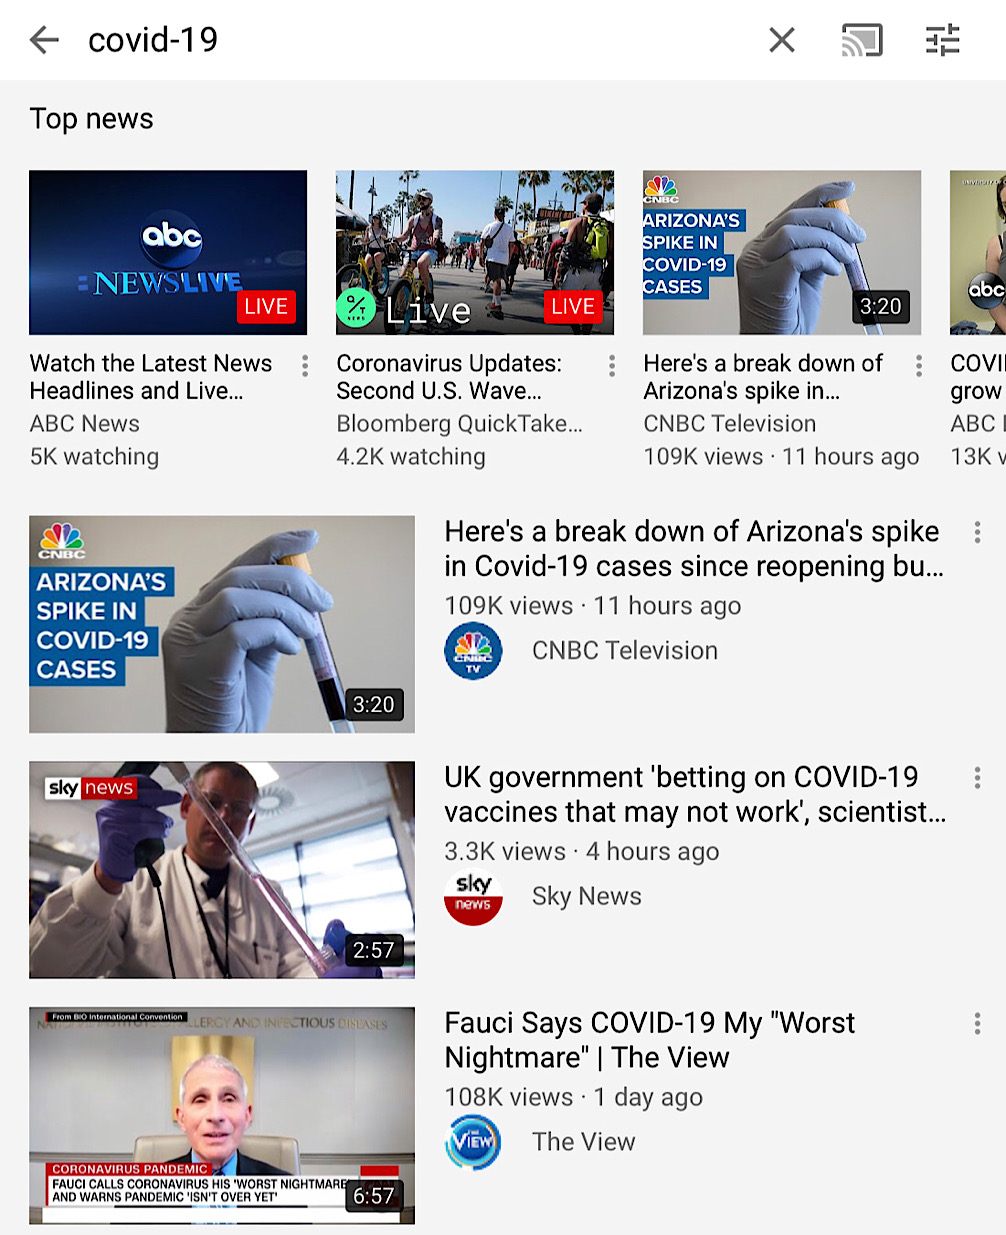 Mainstream media outlets dominate the YouTube search results for coronavirus topics